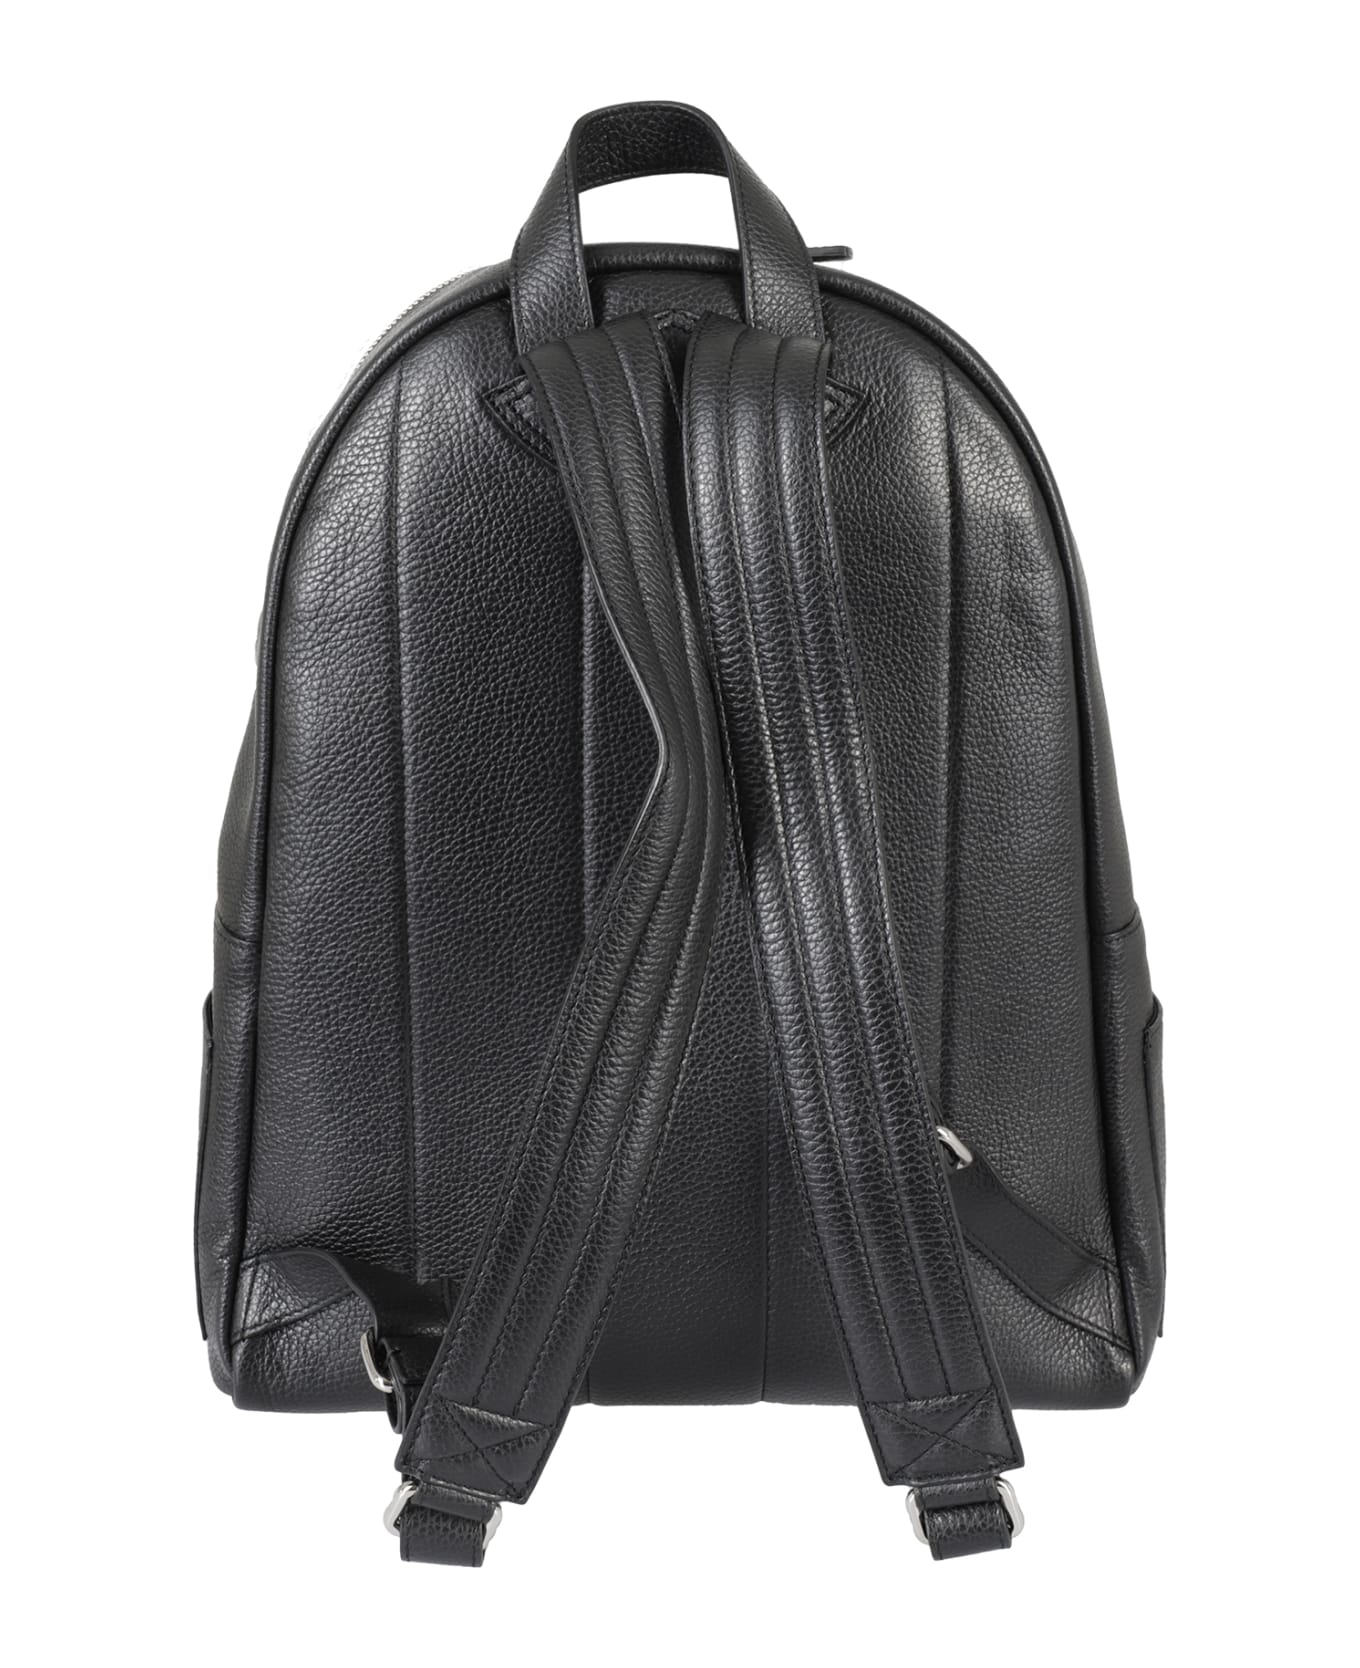 Orciani Leather Backpack - Ner Nero バックパック